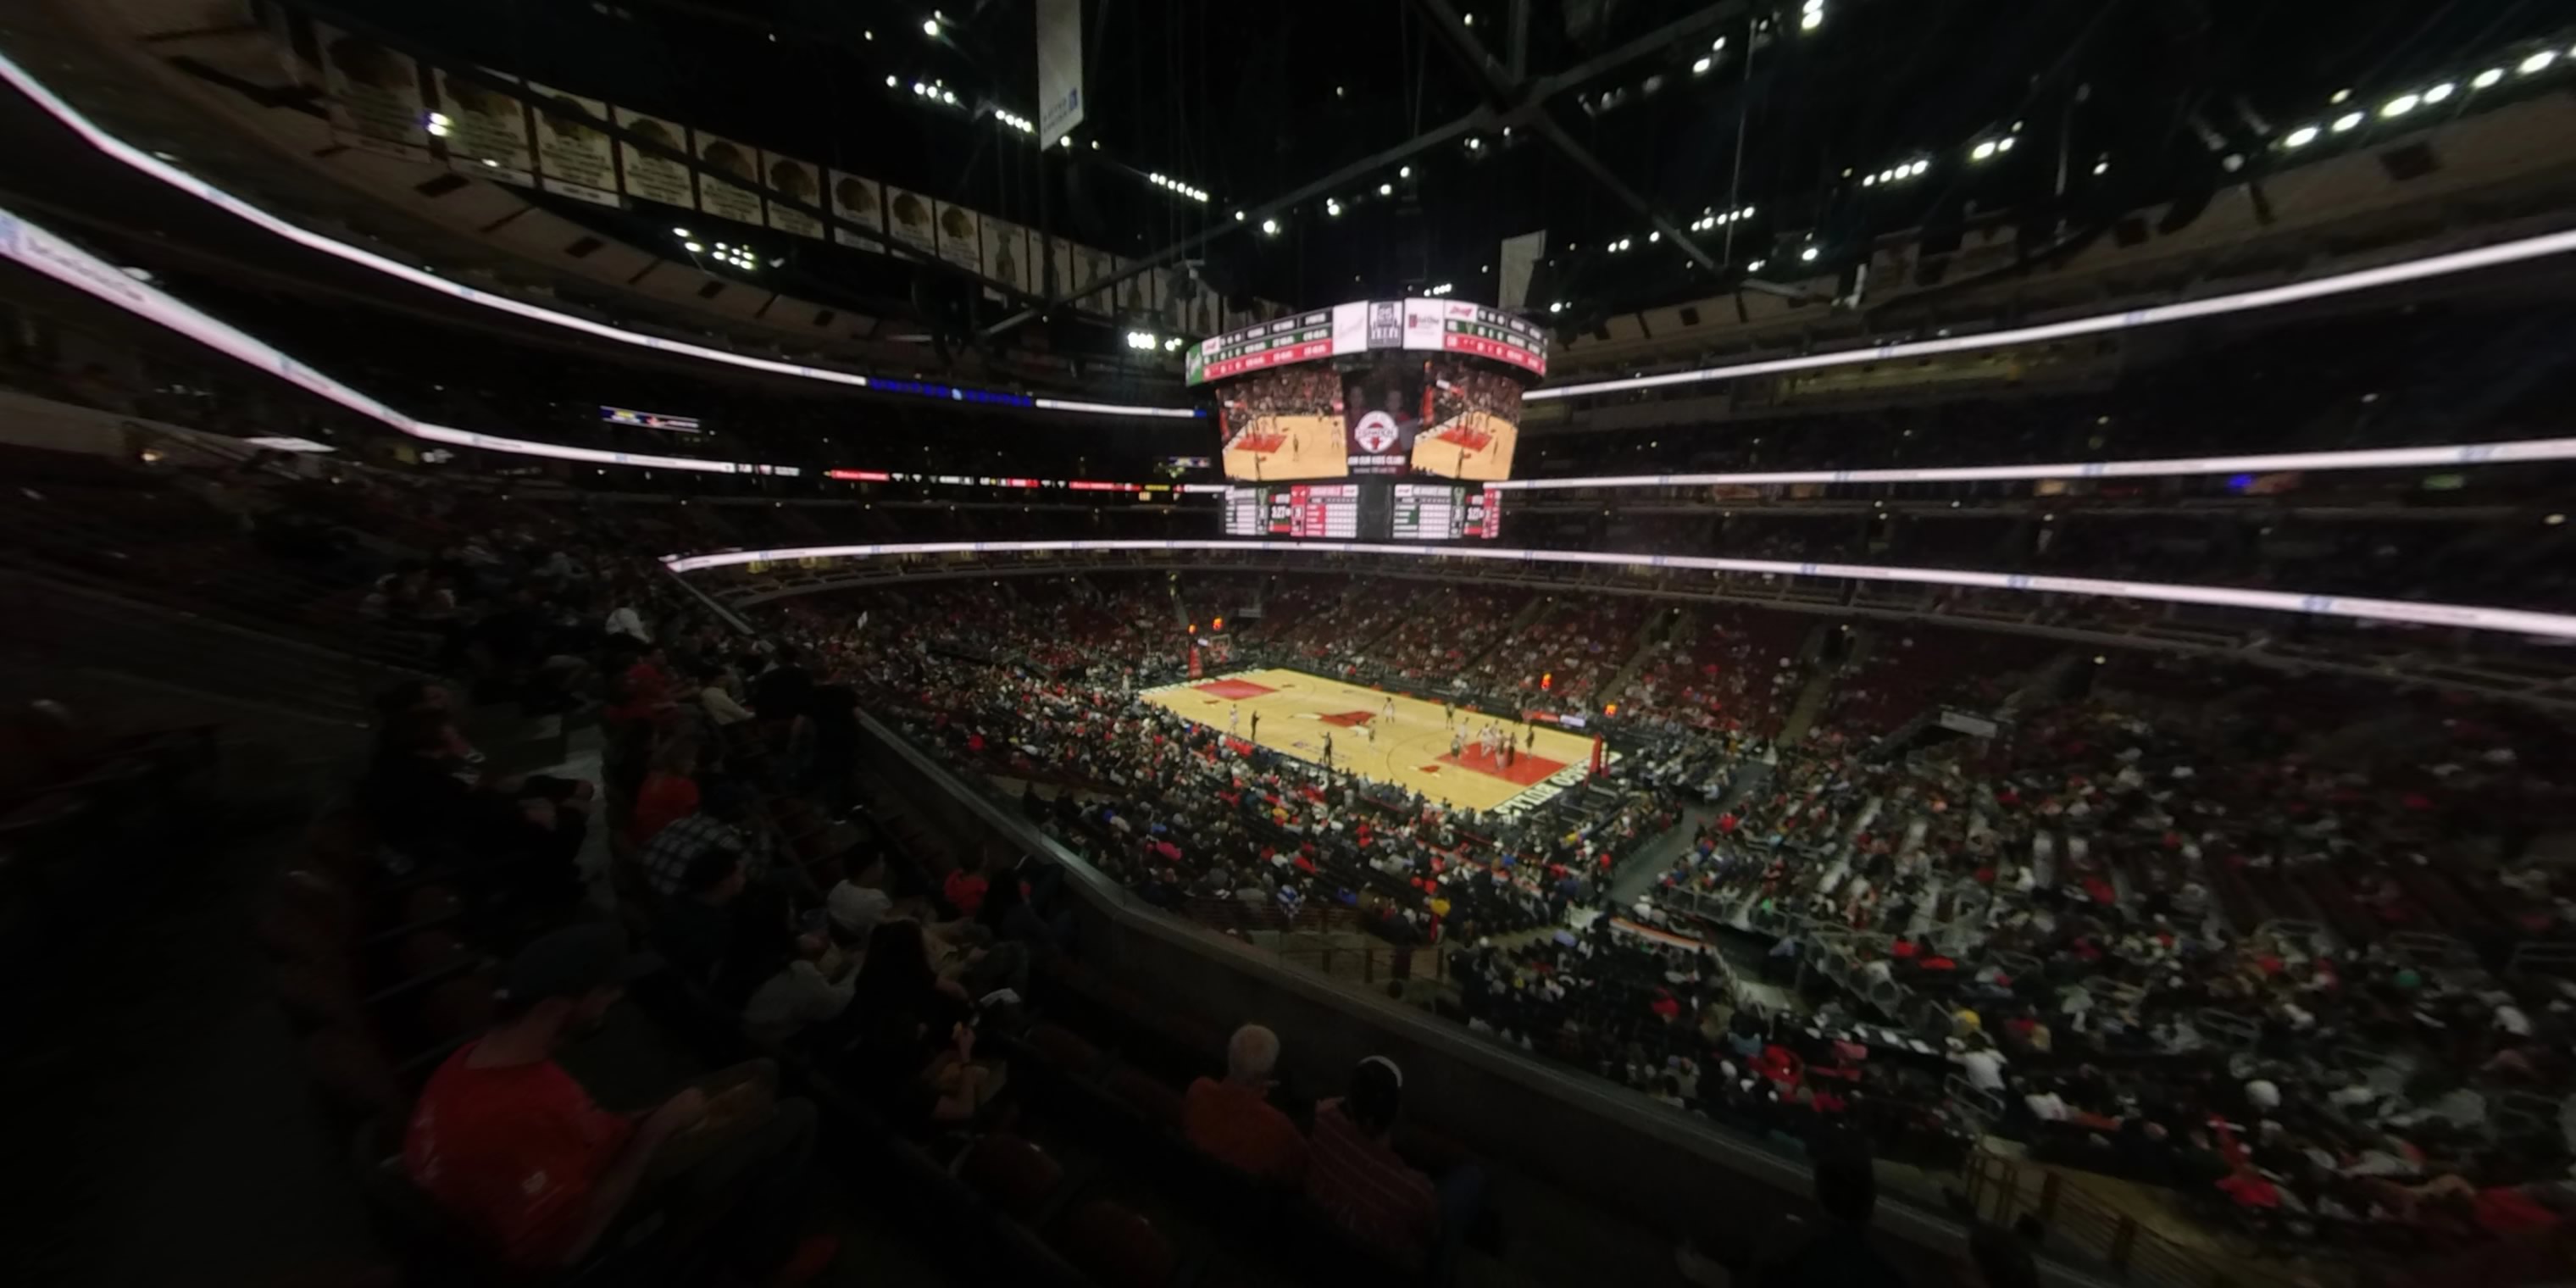 section 231 panoramic seat view  for basketball - united center